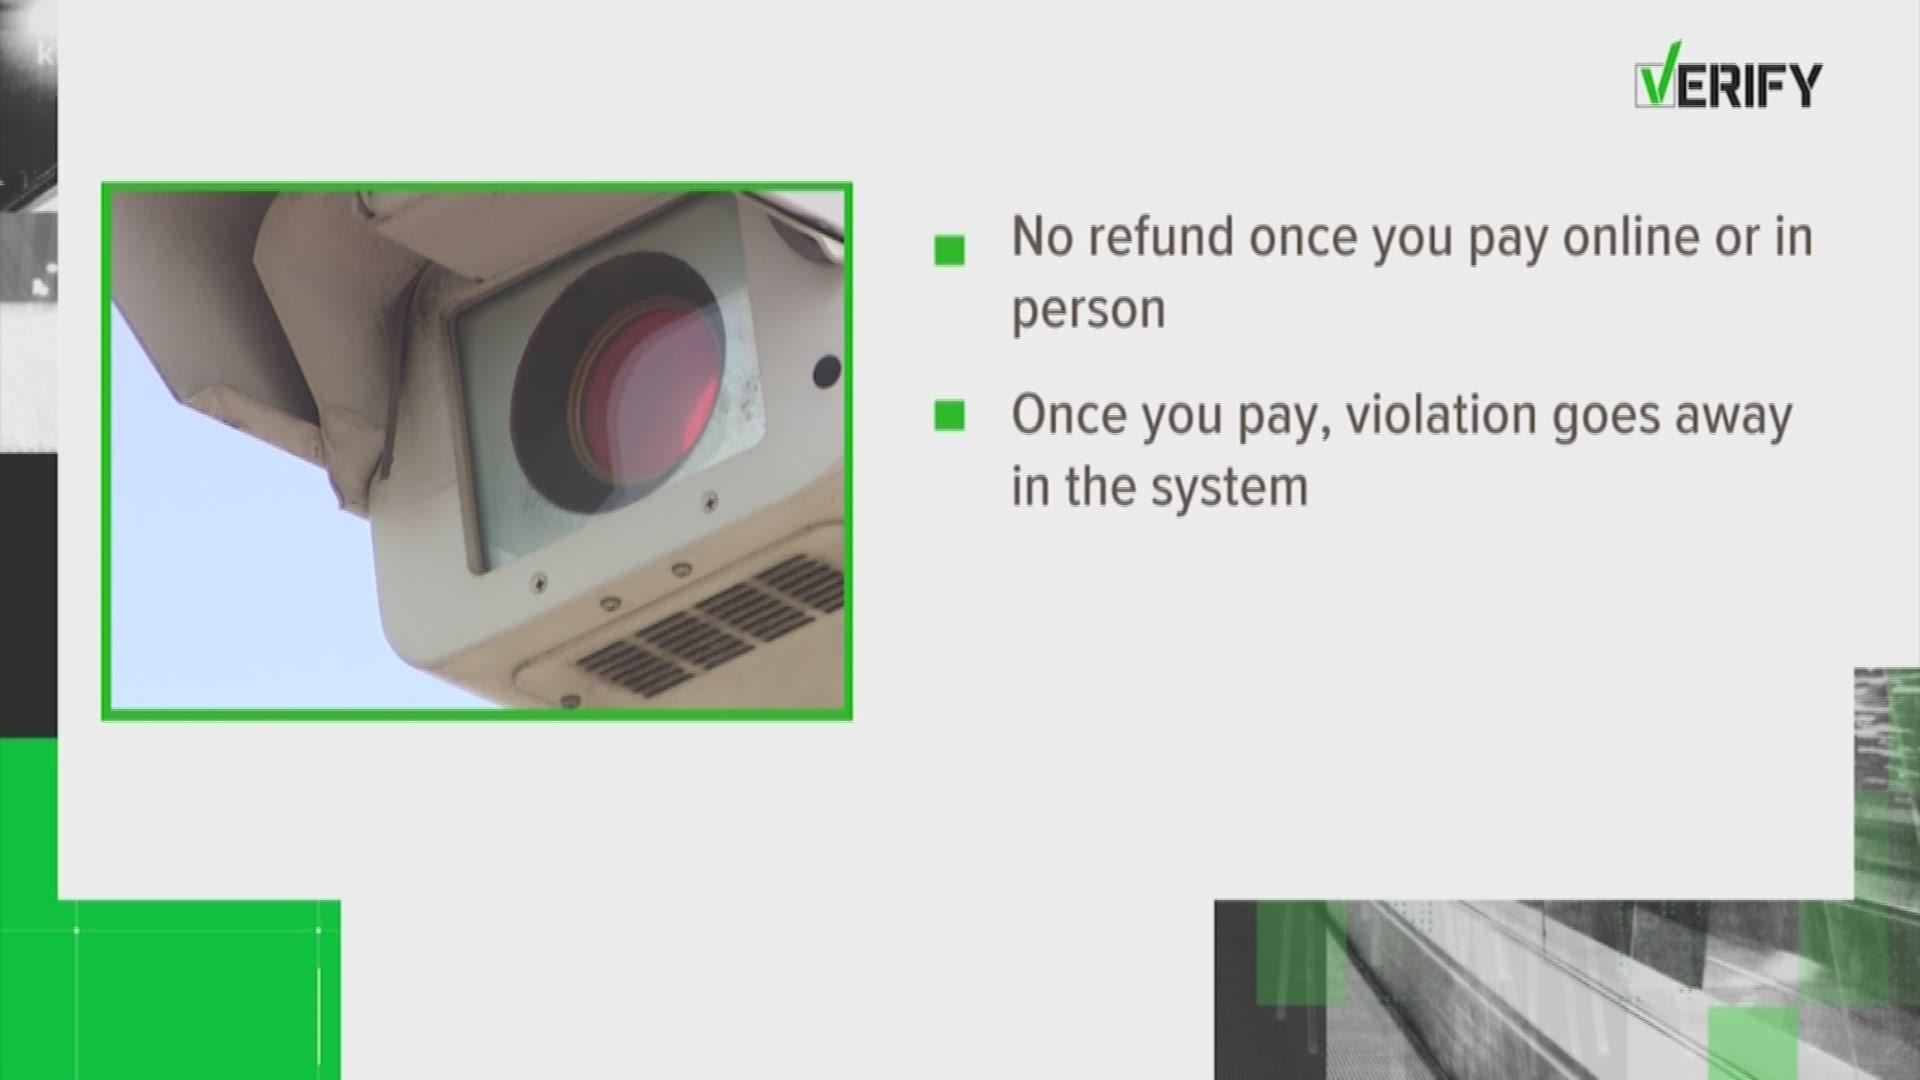 Since red light cameras were banned, KHOU 11 viewer Cynthia Stiles wanted to know if you could get a refund after paying the $100 fine.